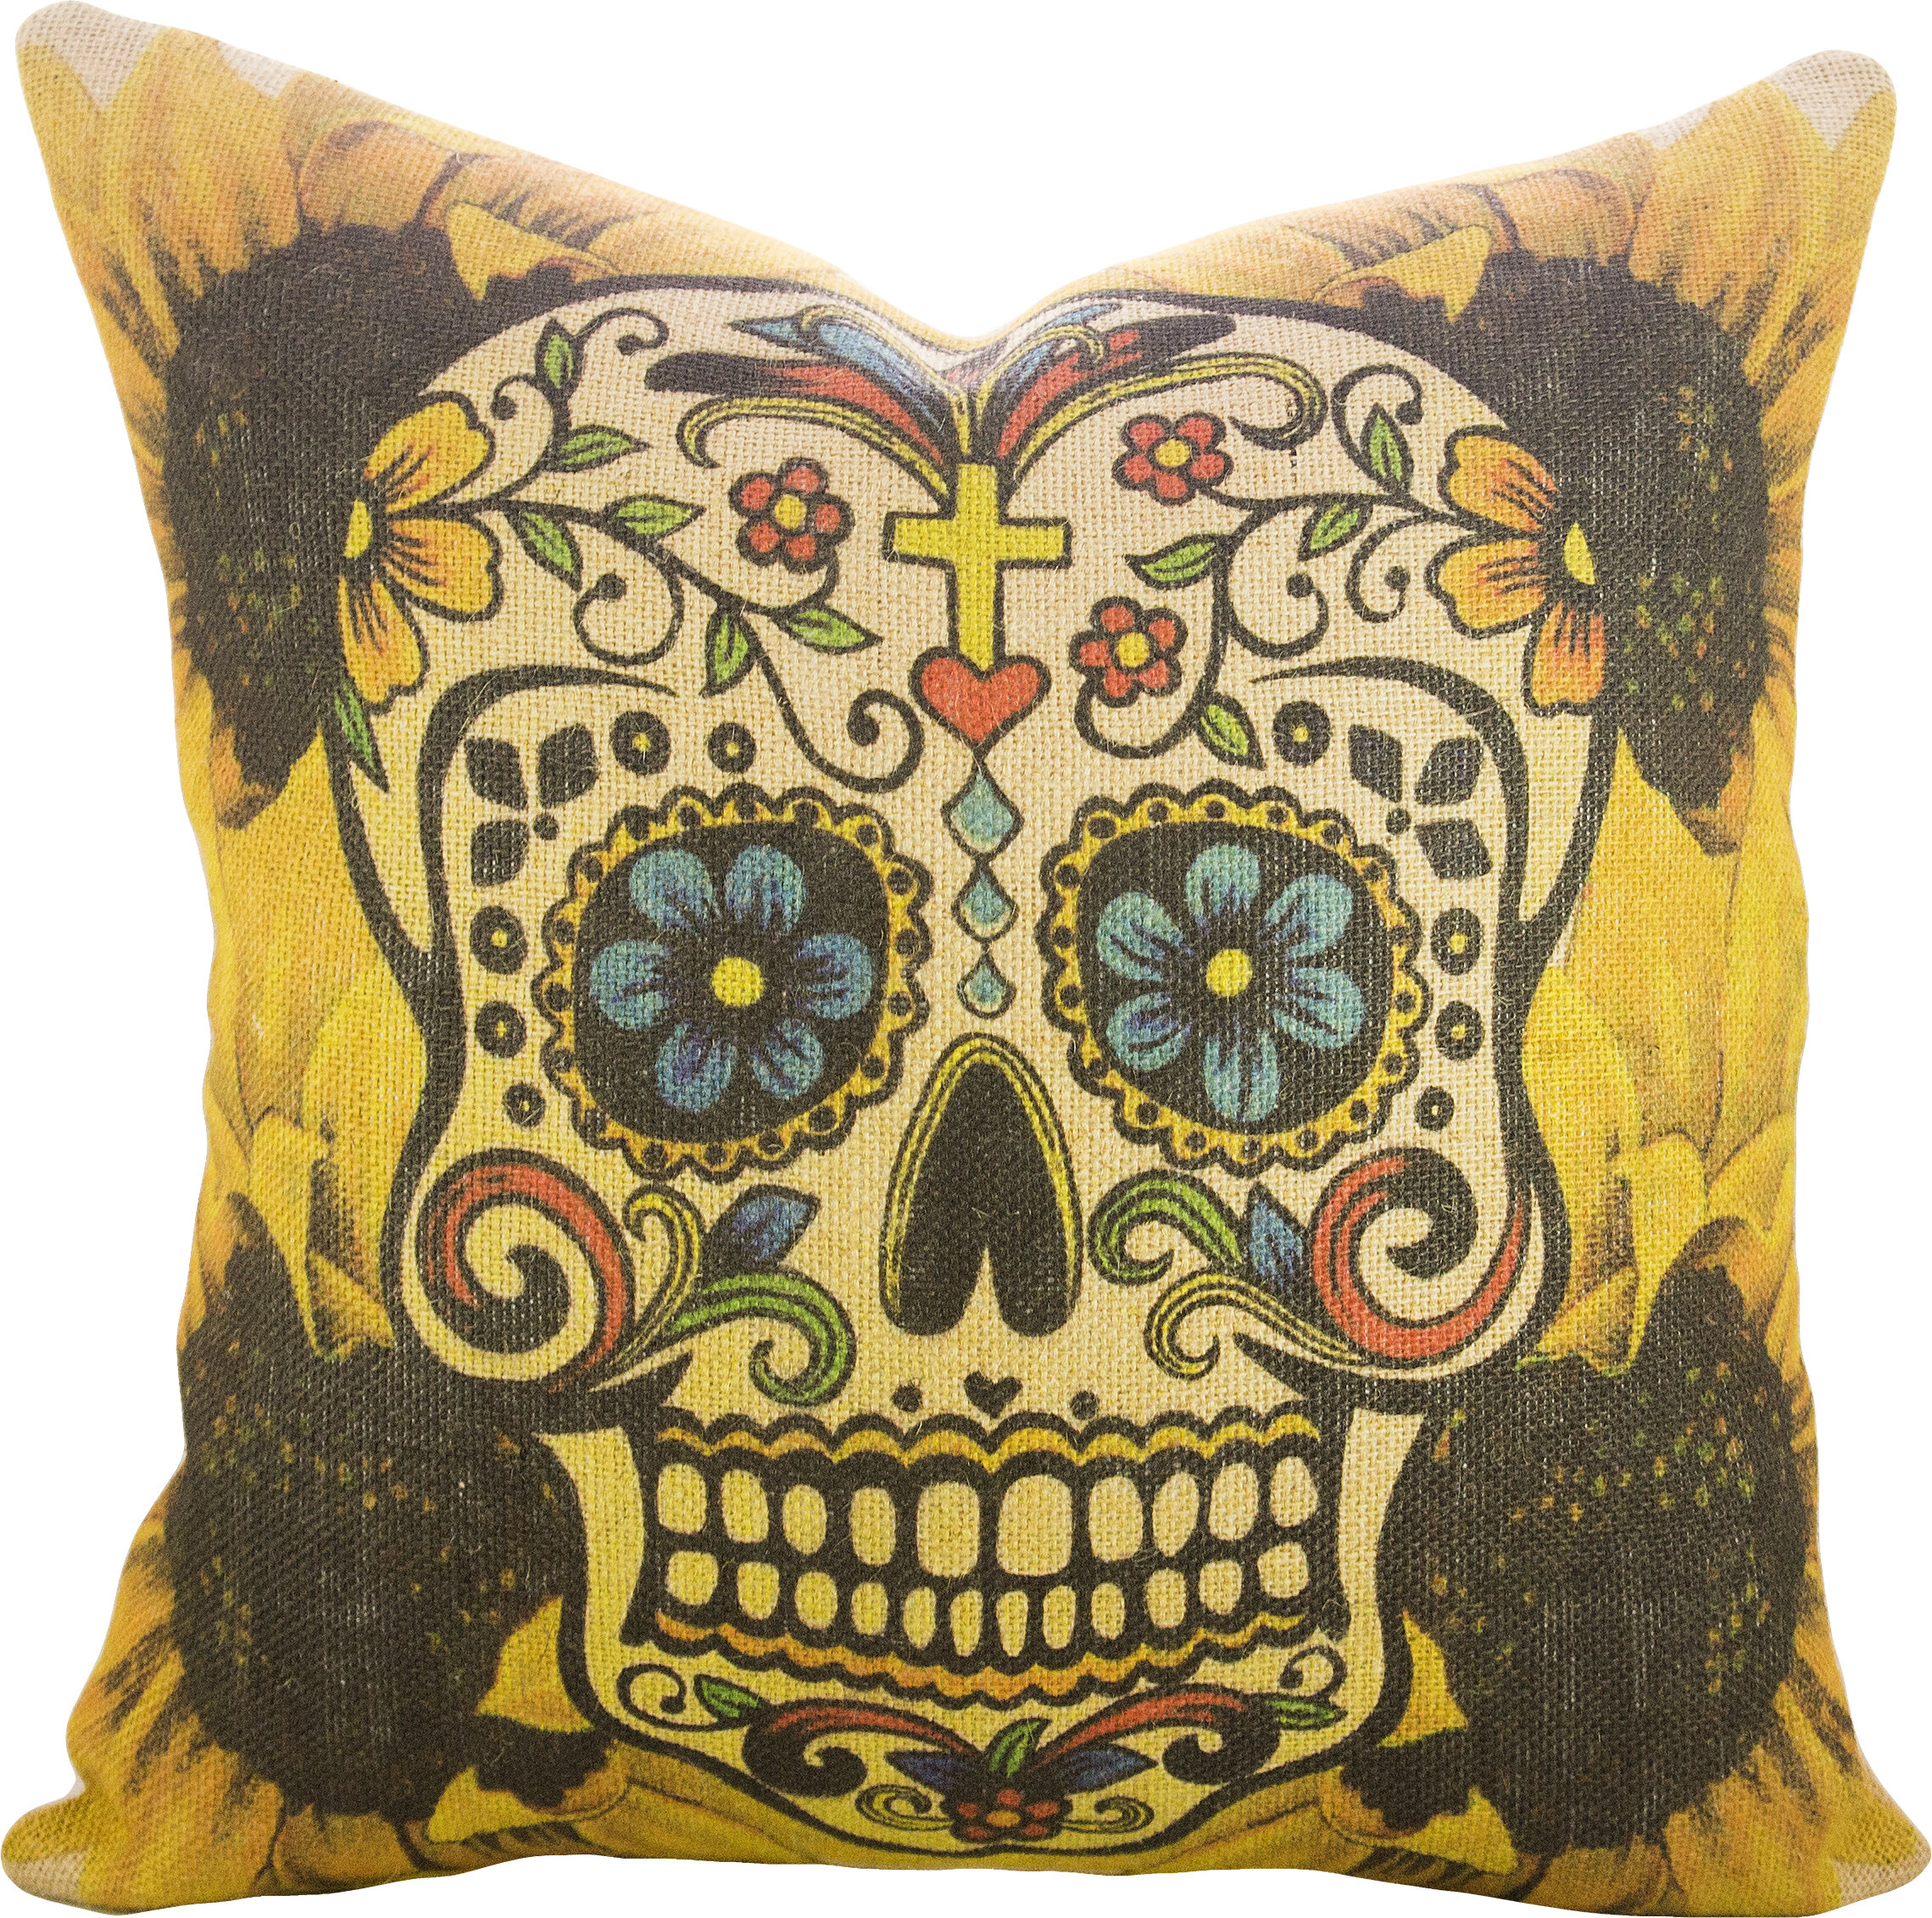 day of the dead pillows